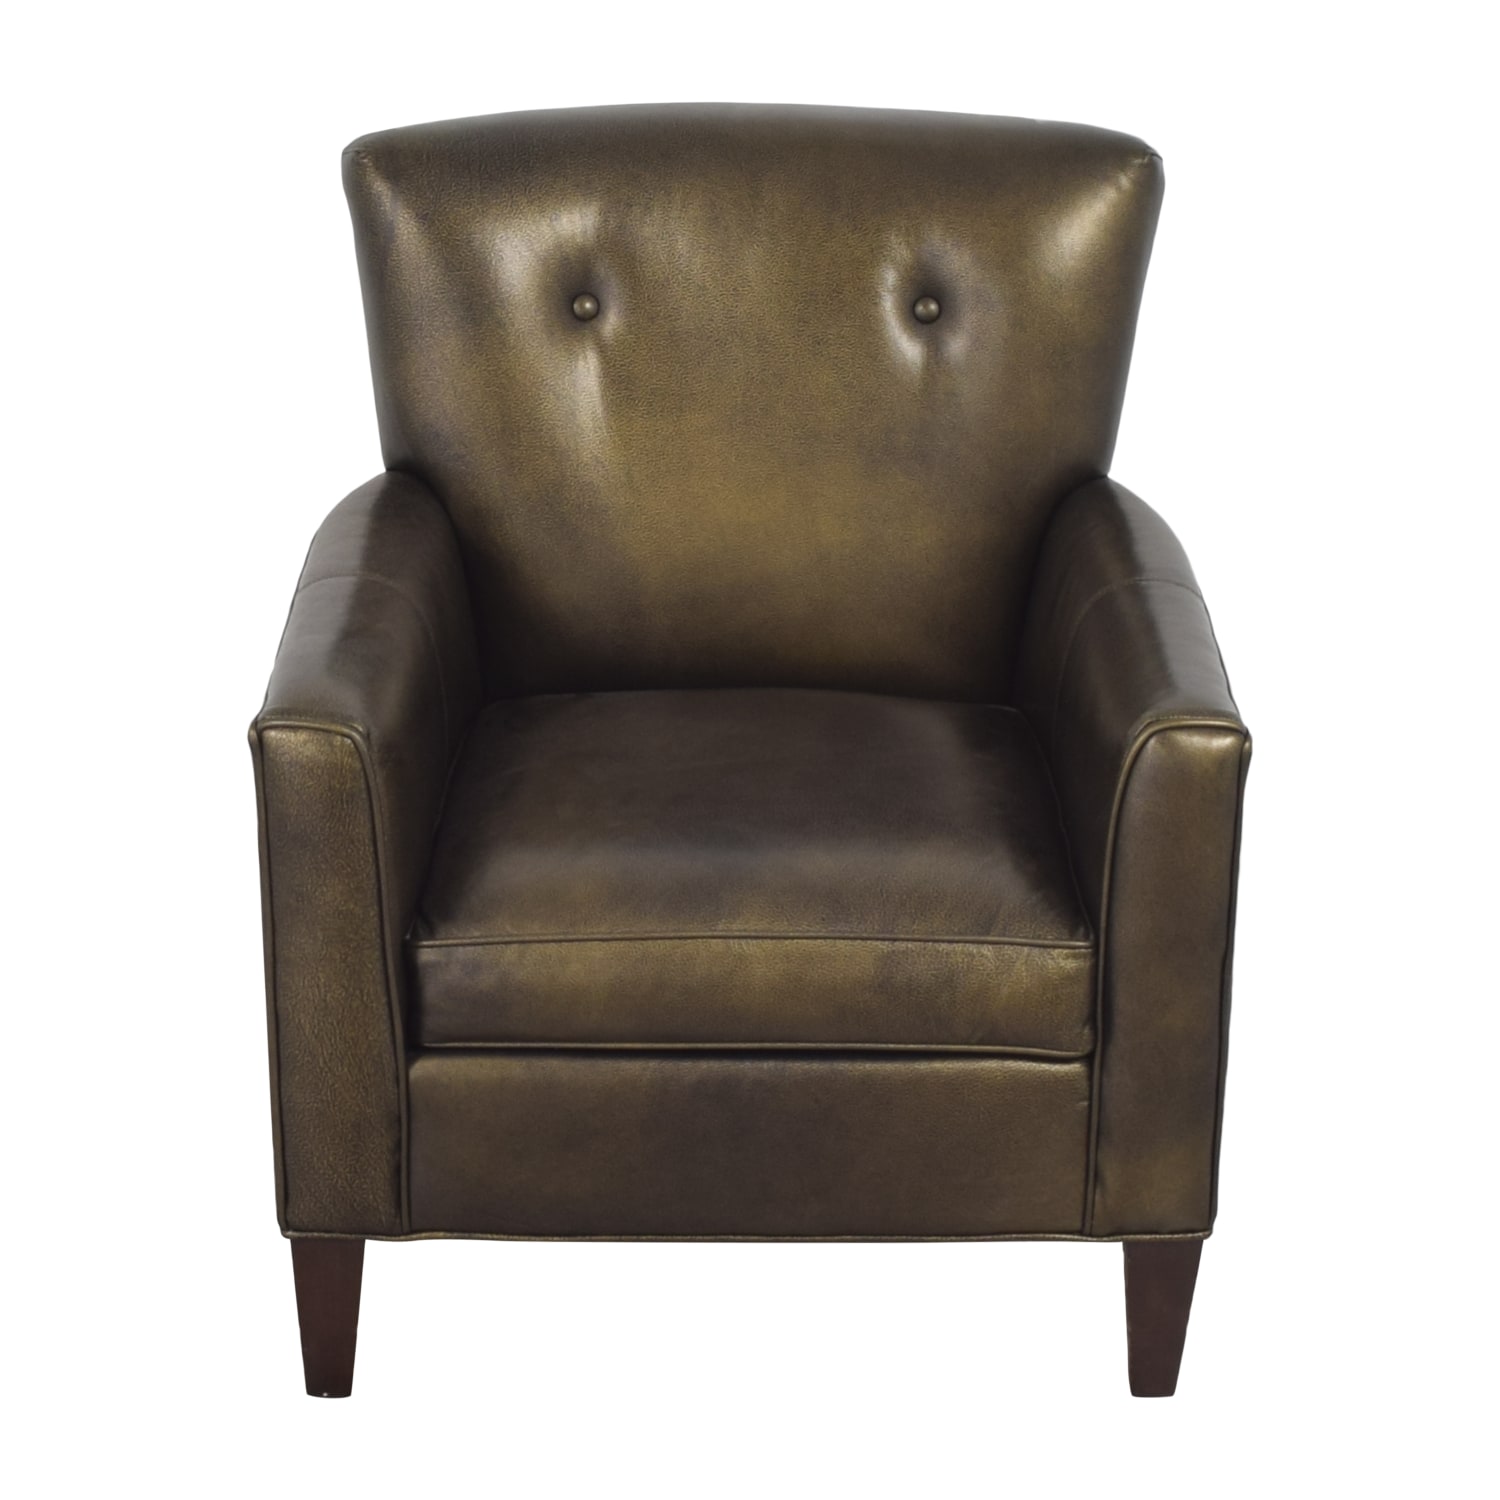 buy Ethan Allen Tufted Wingback Chair Ethan Allen Chairs